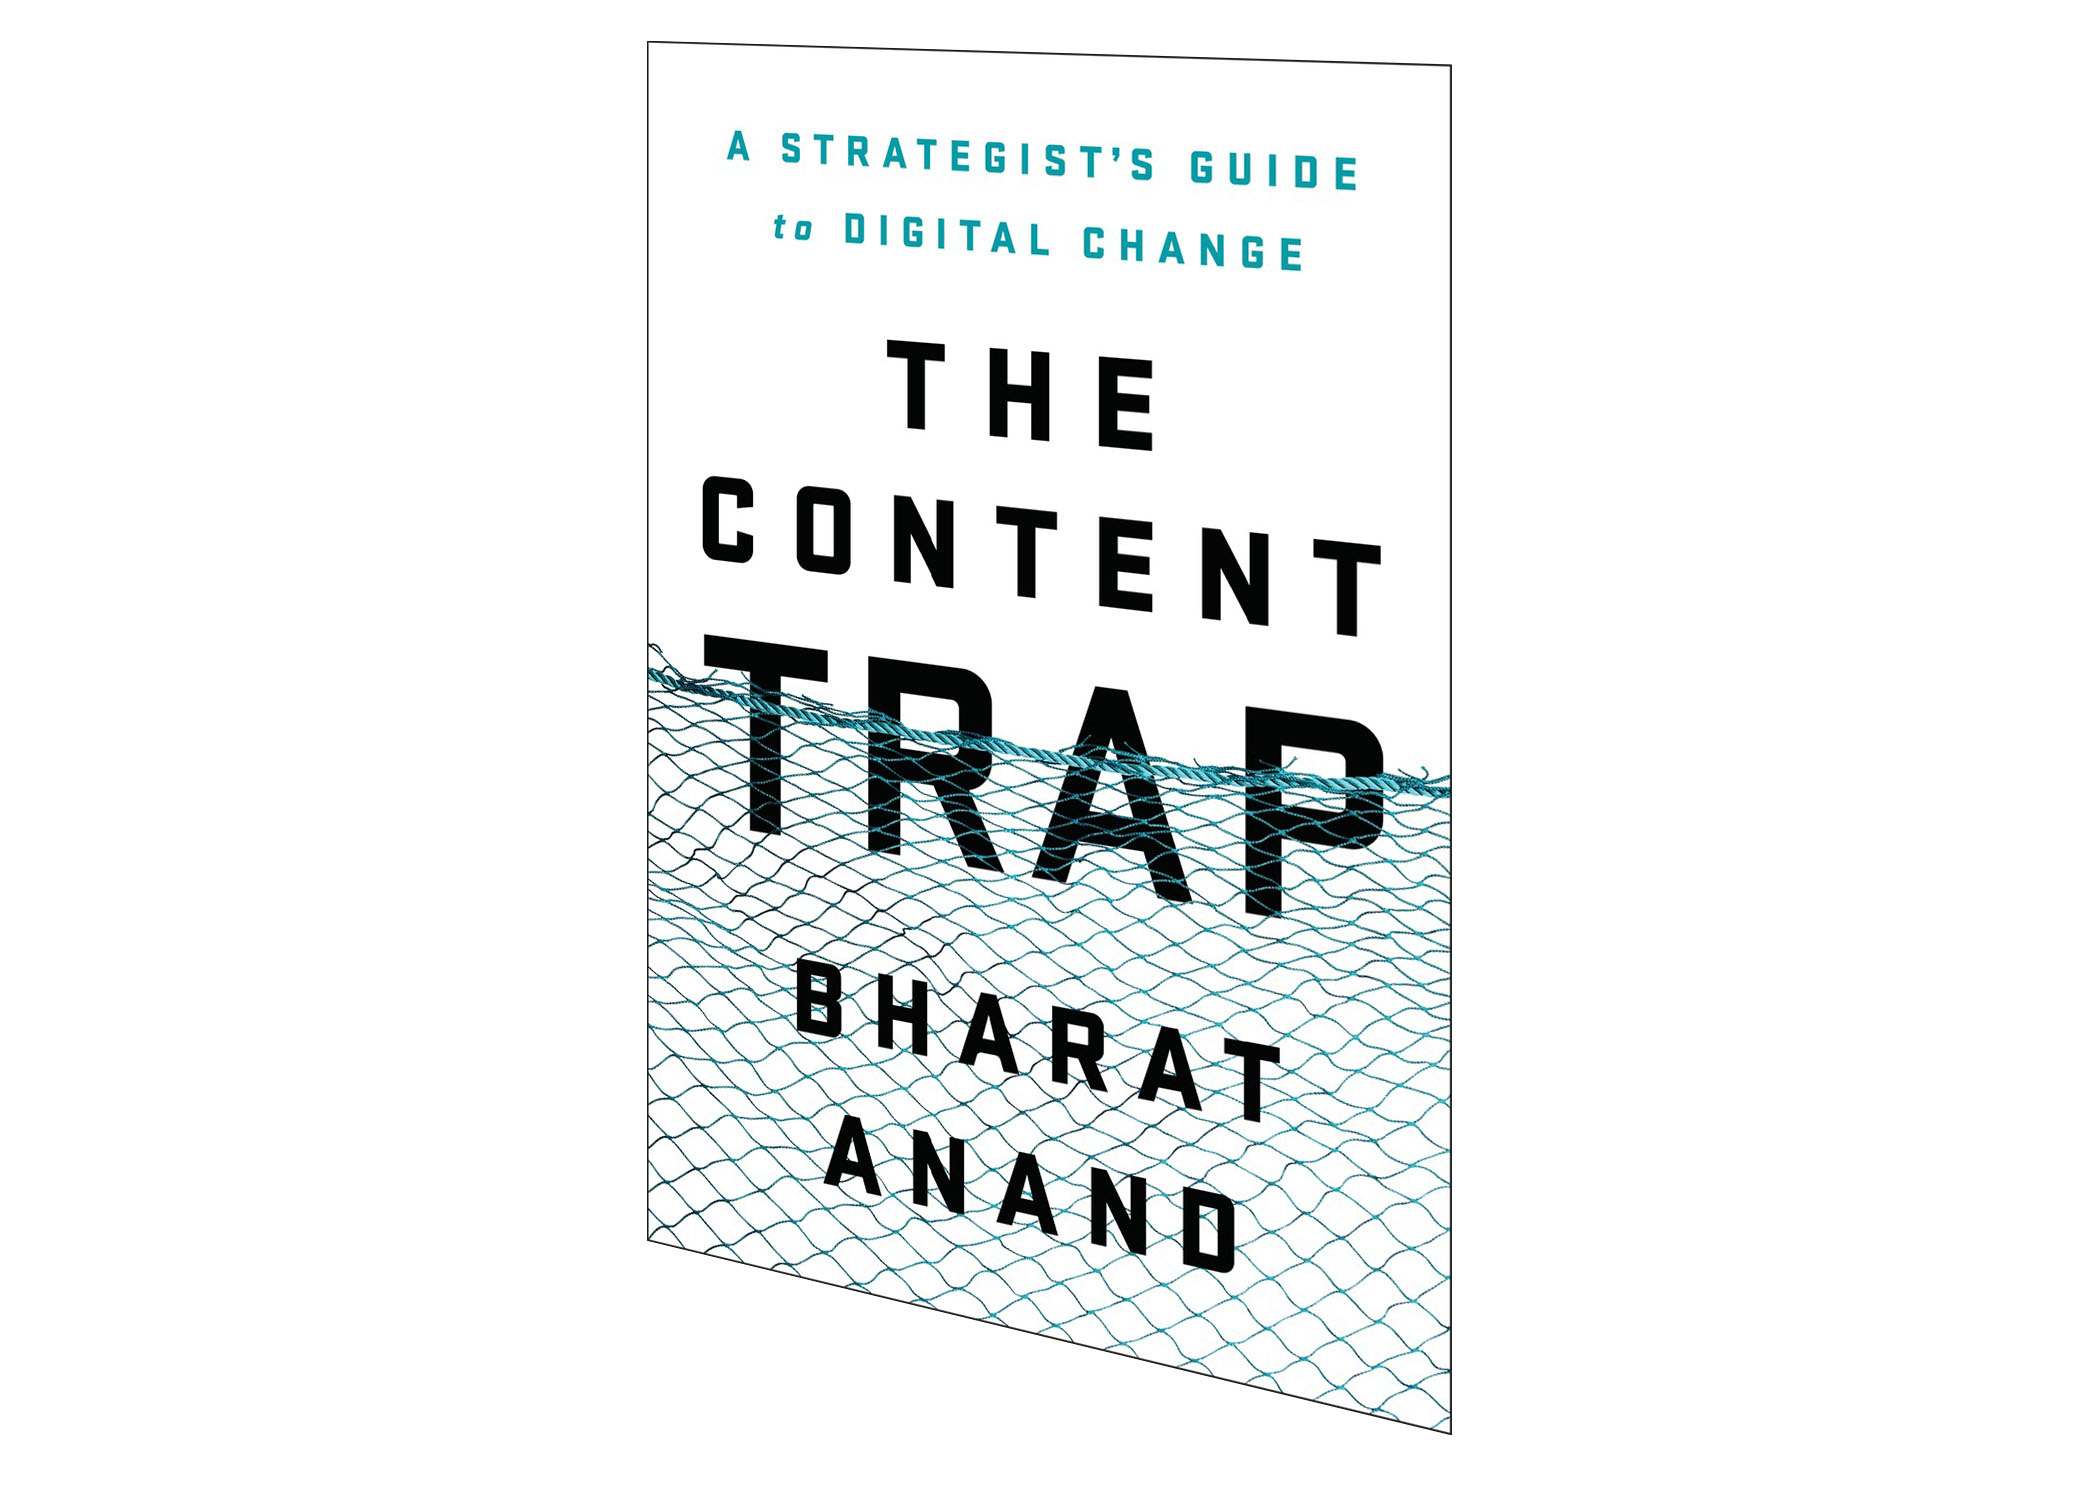 "The Content Trap: A Strategist's Guide to Digital Change" (Random House) by Bharat Anand